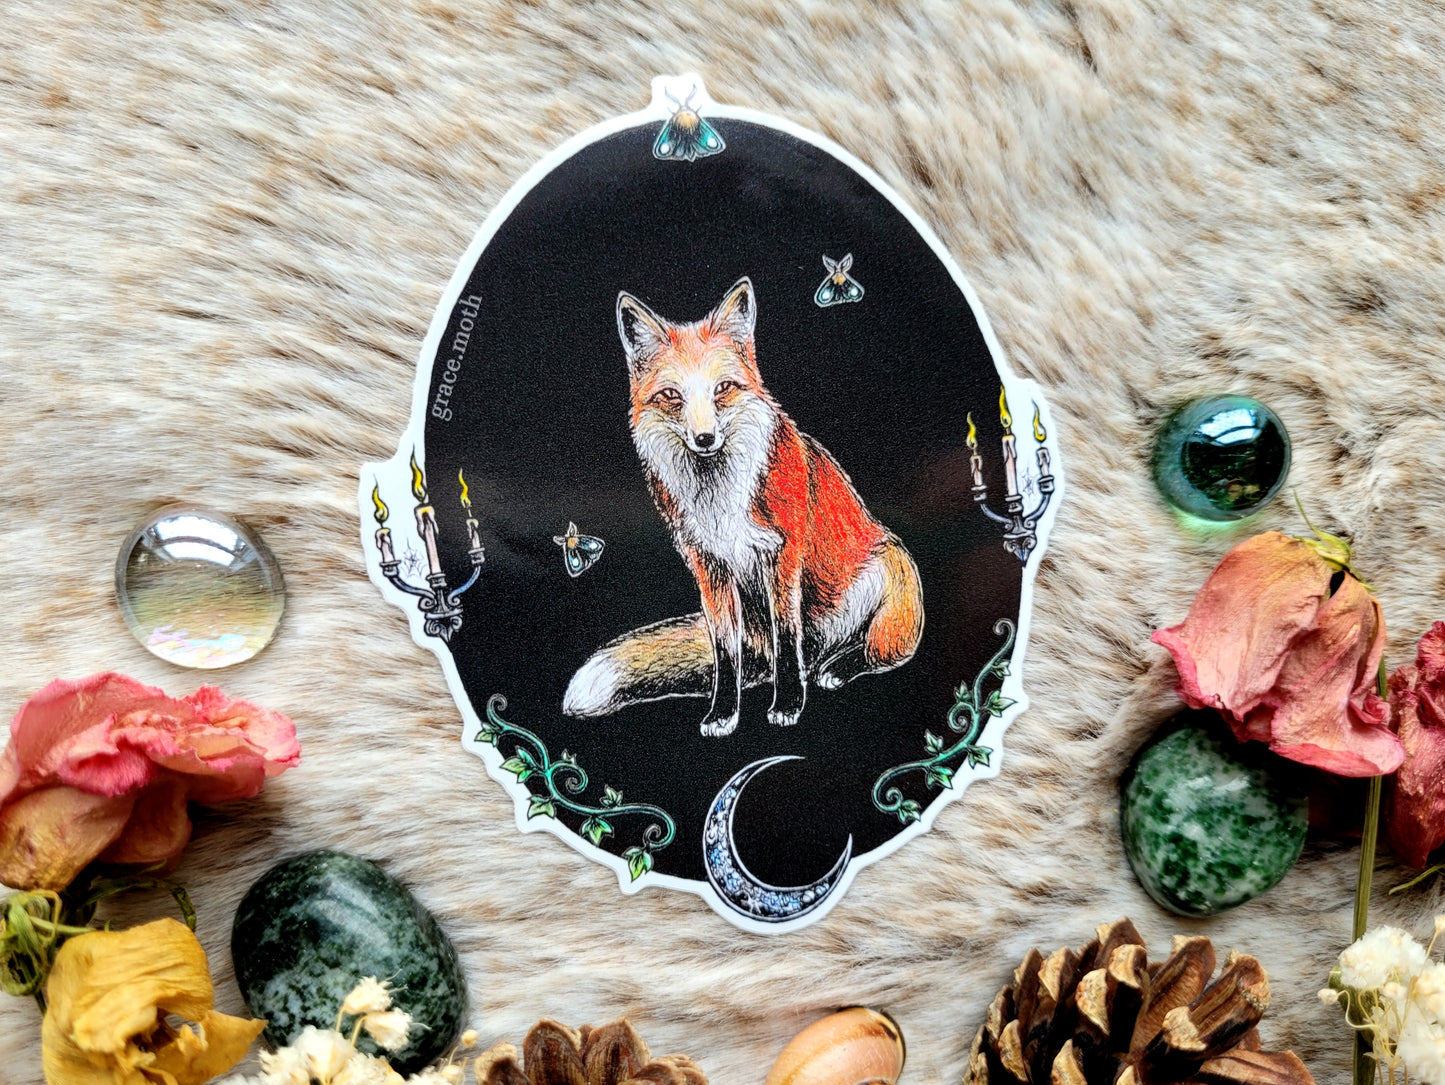 Fox Frame - Vinyl Sticker 10cm - Cottagecore - Witchy - Gothic - Illustrated by Grace moth